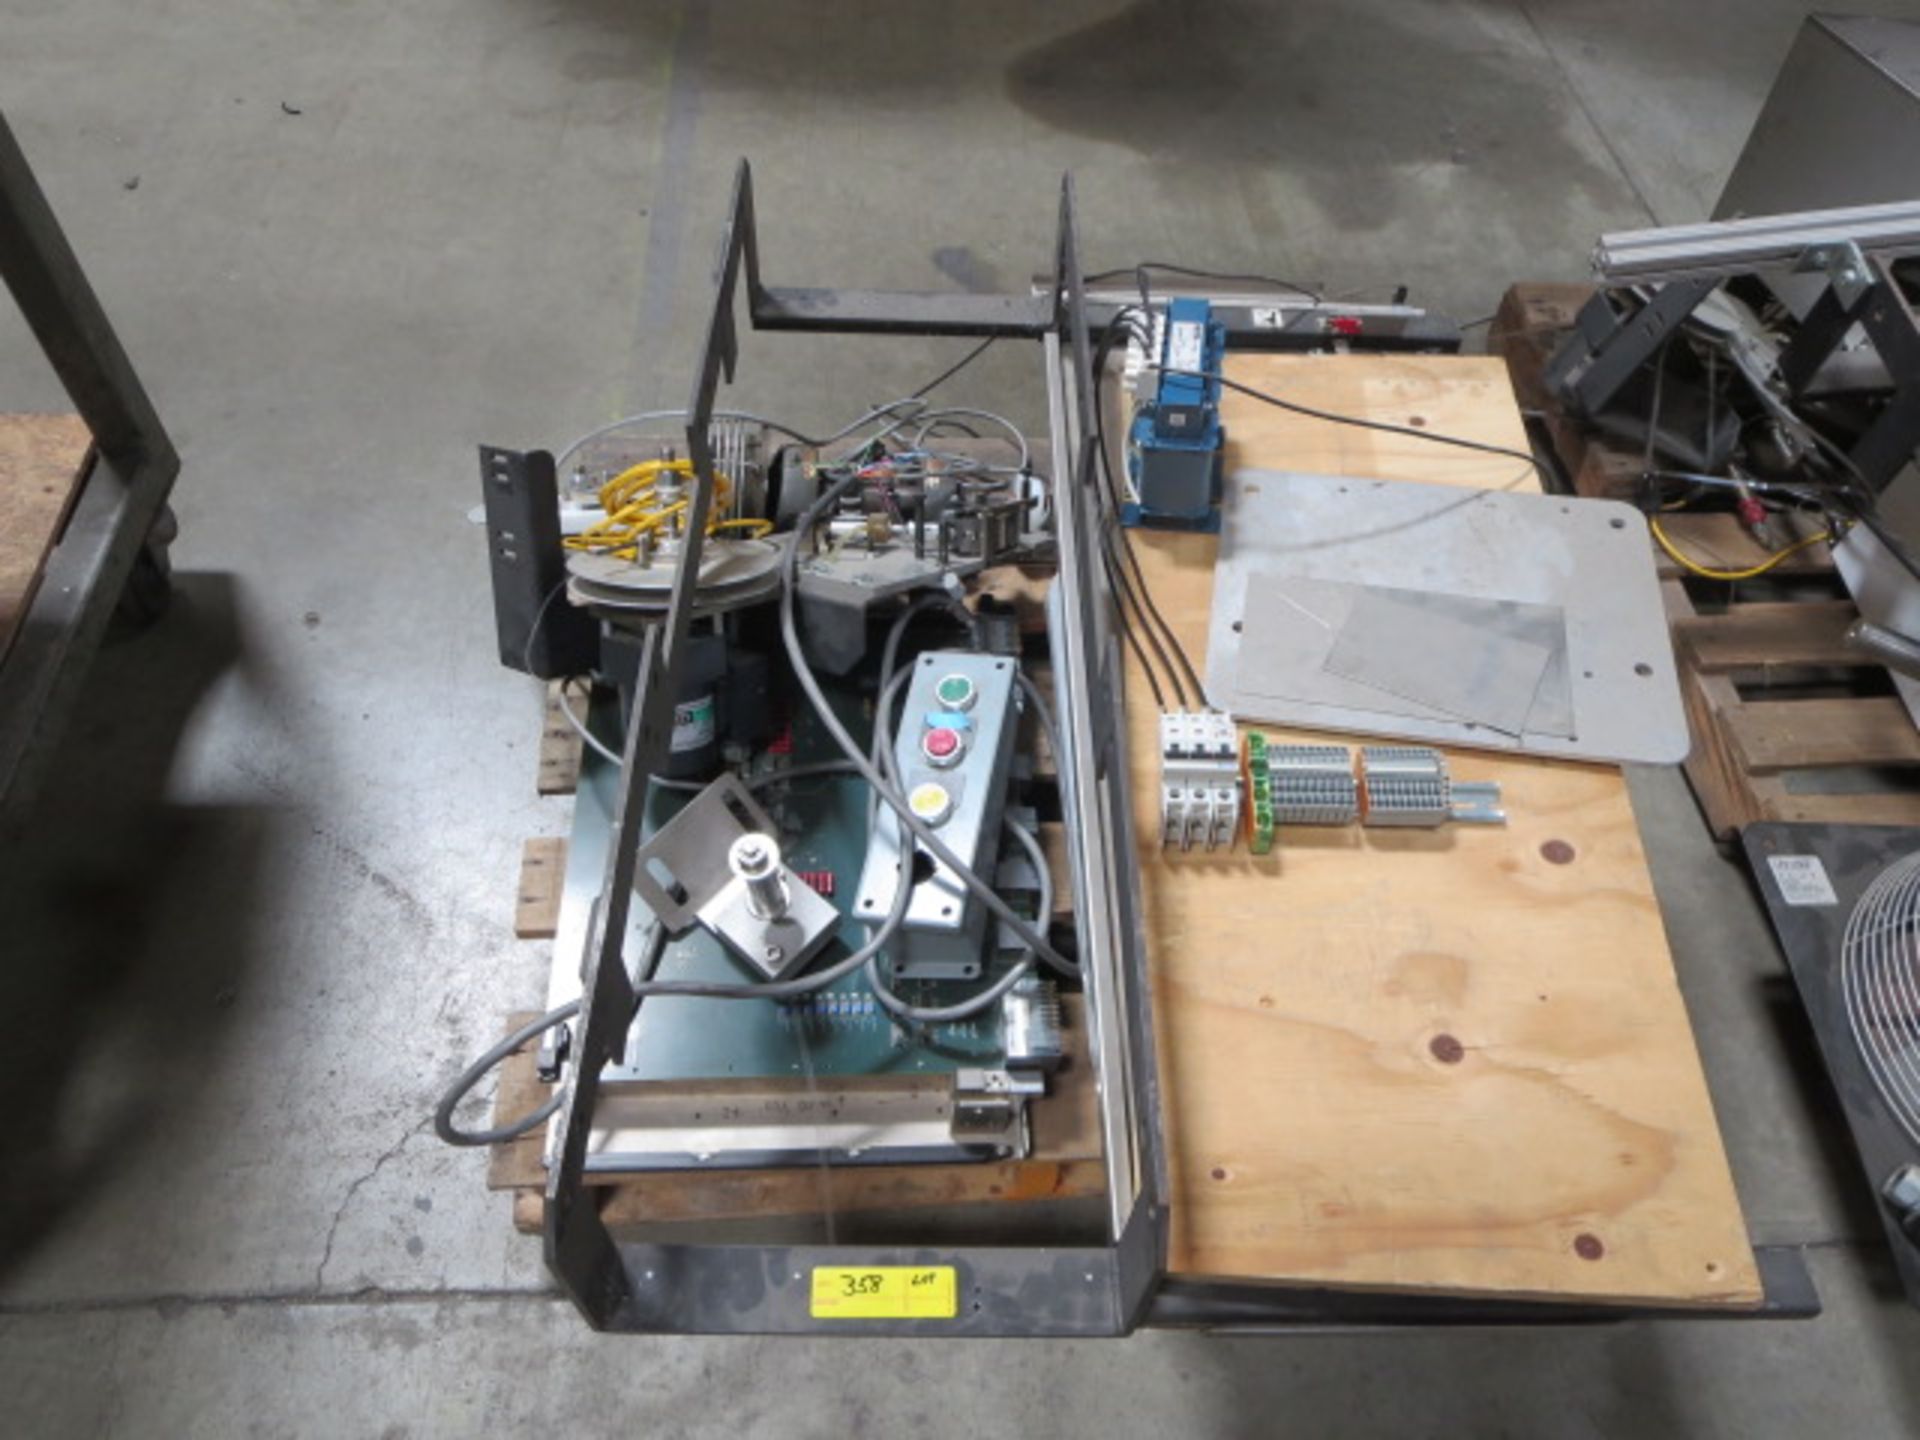 Lot of Assorted Machine Components, Approx 50pcs, Contents of 4 Pallets and 1 Cart - Image 2 of 5